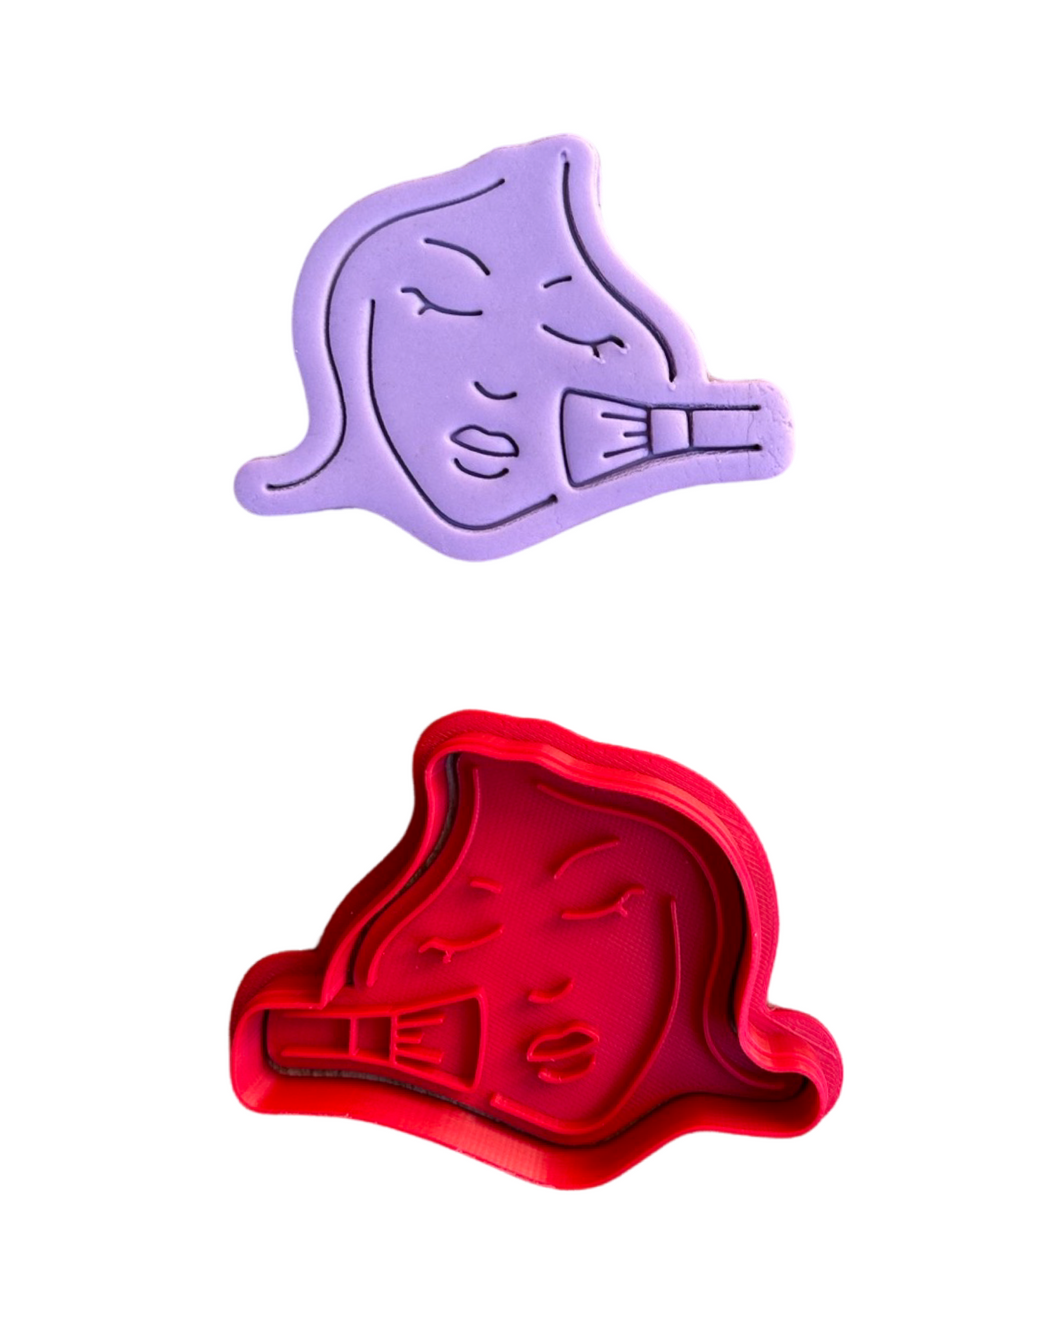 Make up cookie cutter stamp set Mother's day perfume lipstick